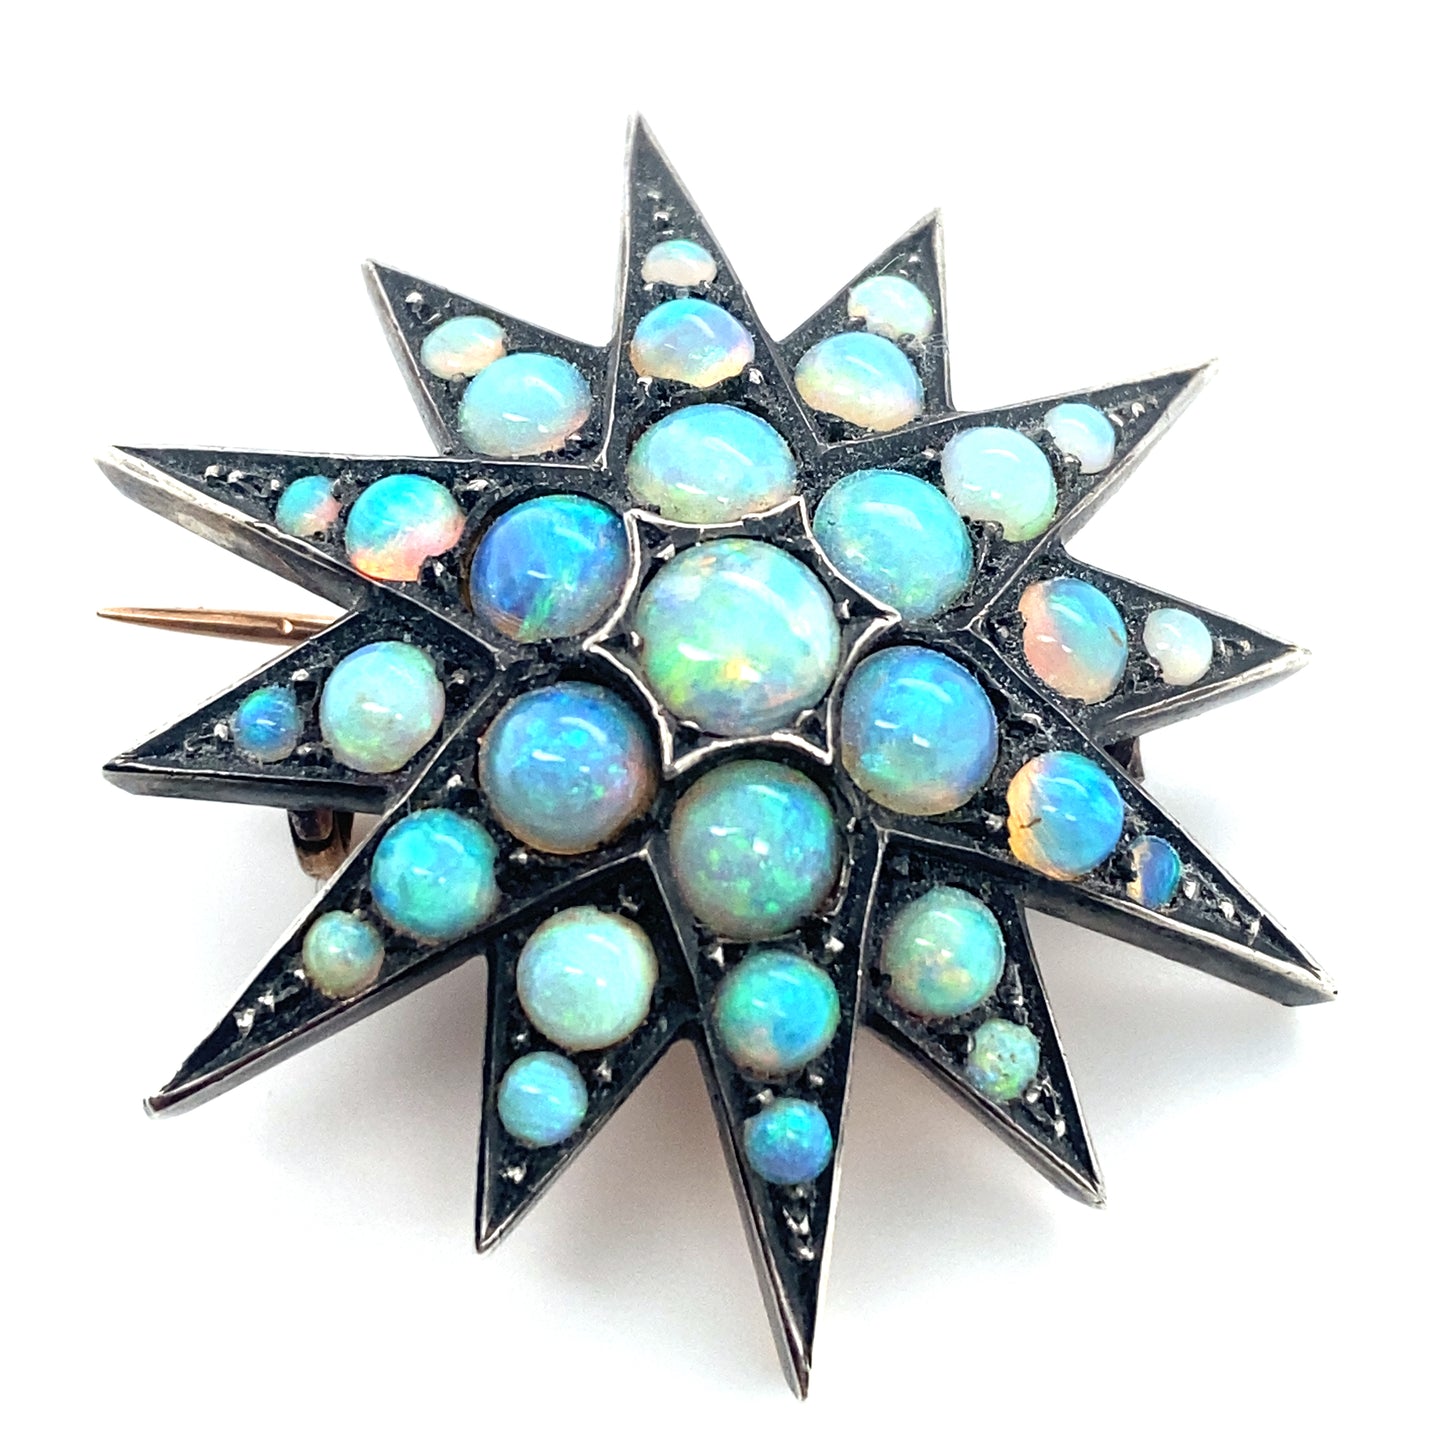 Circa 1880s Victorian Opal Starburst Brooch in Silver and Rose Gold